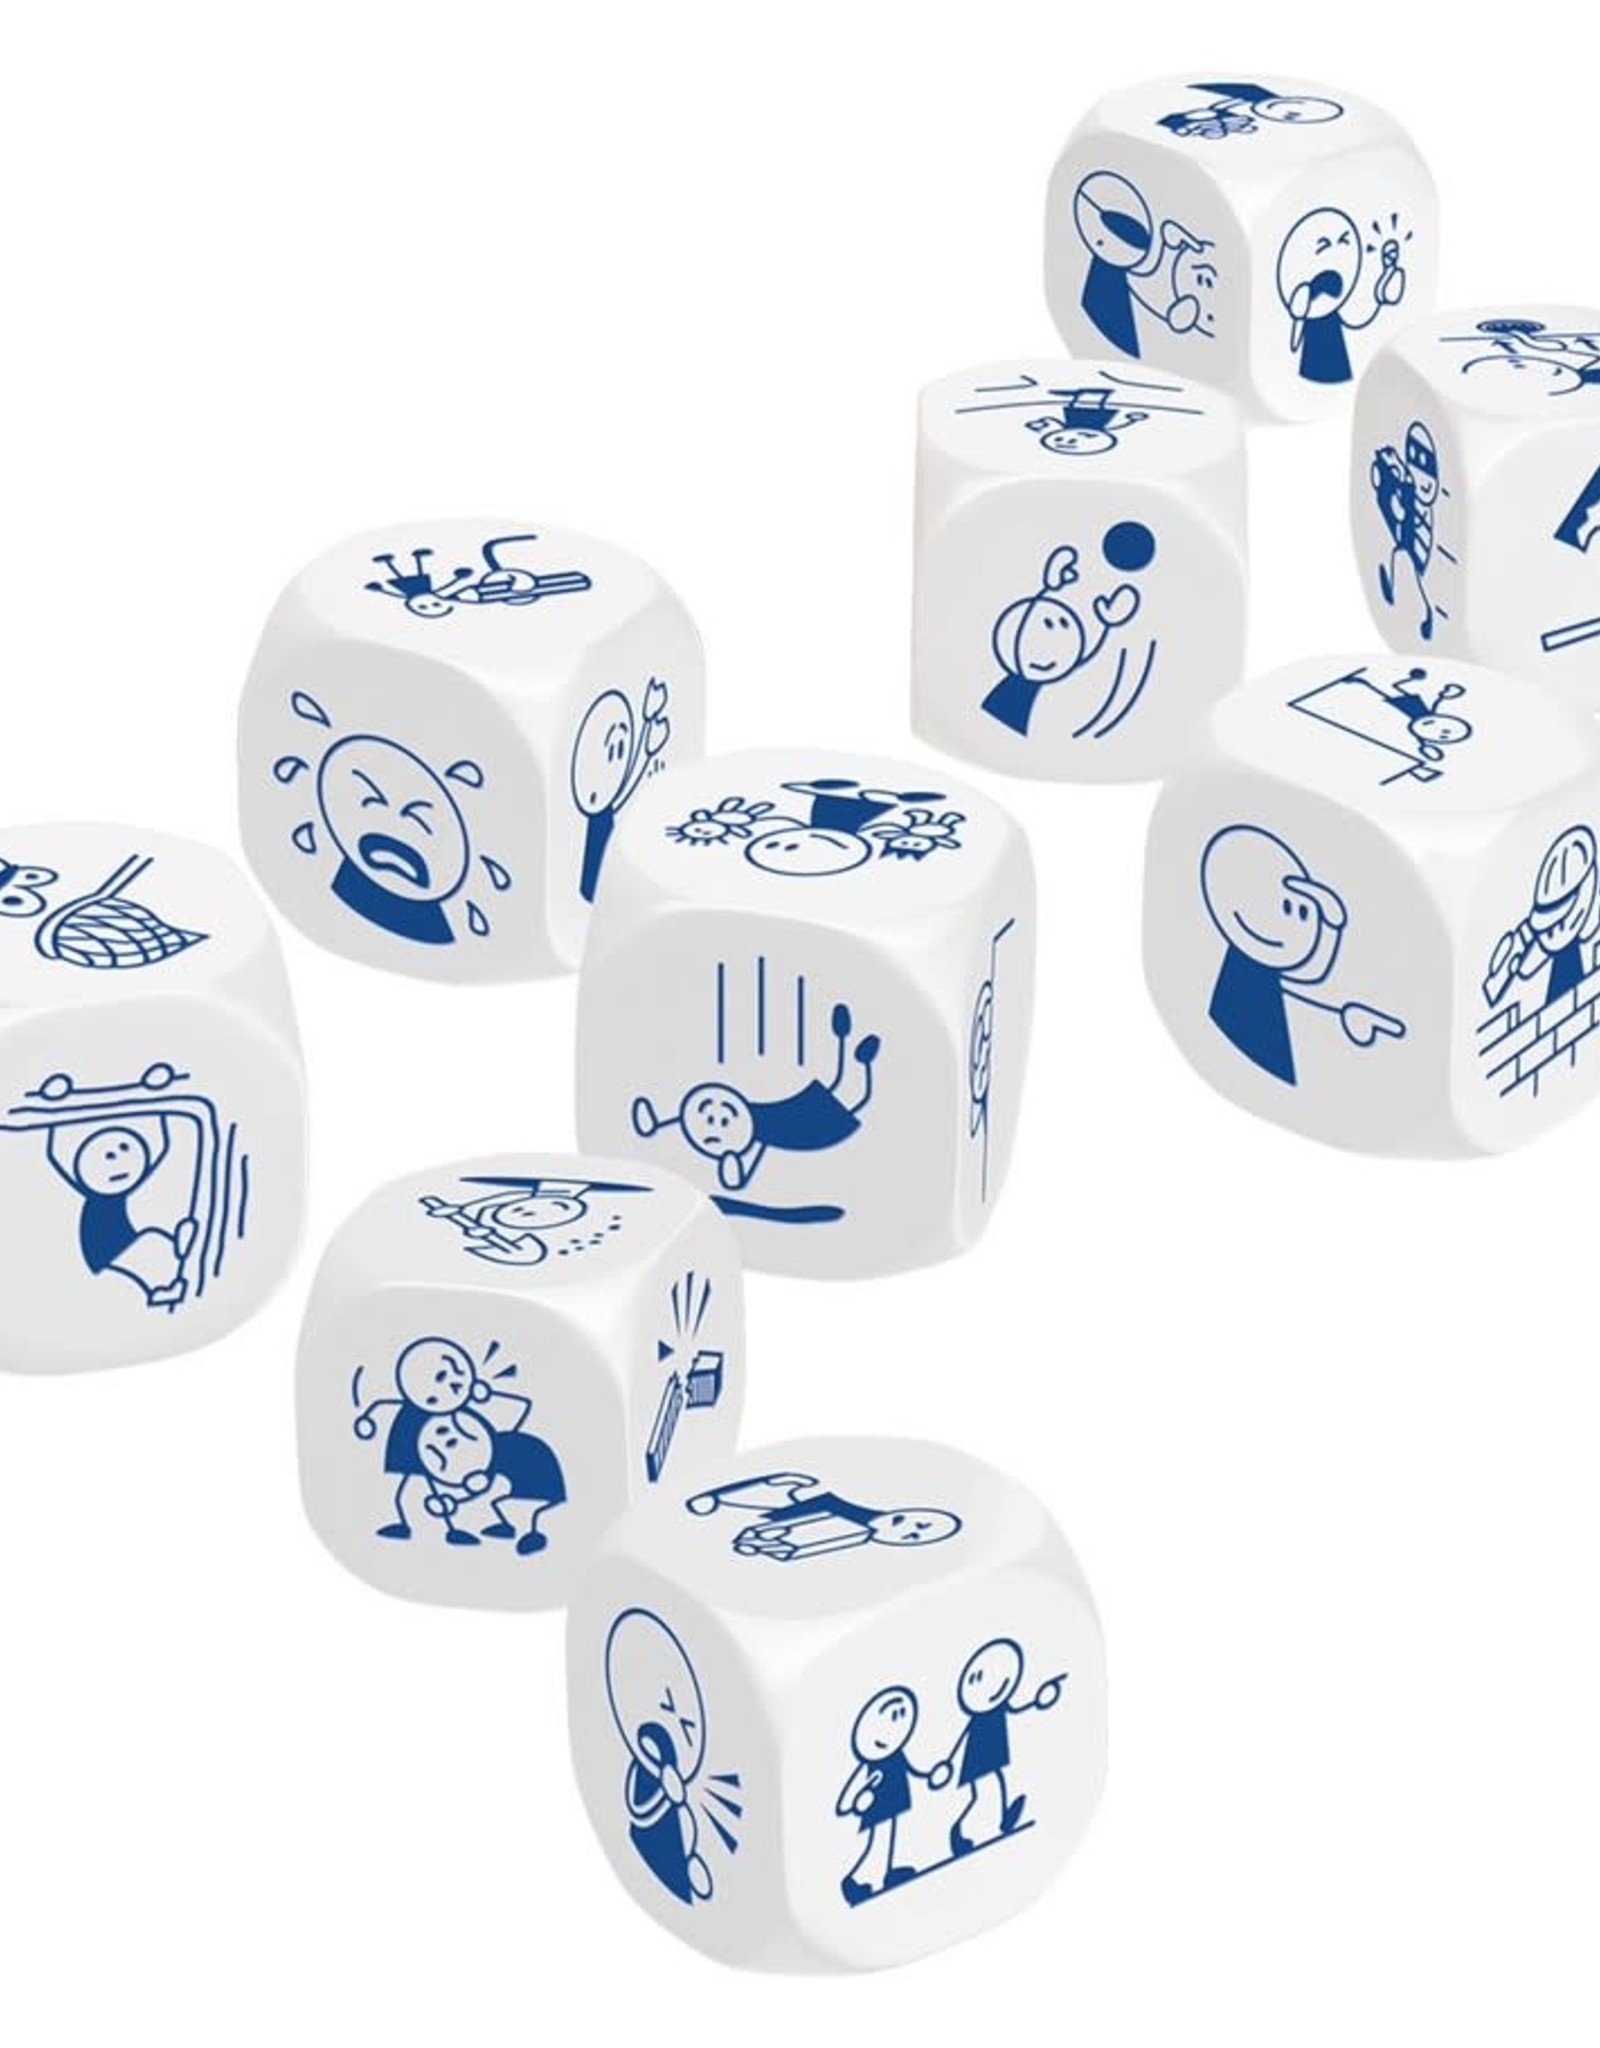 Rory's Story Cubes Actions (peg)